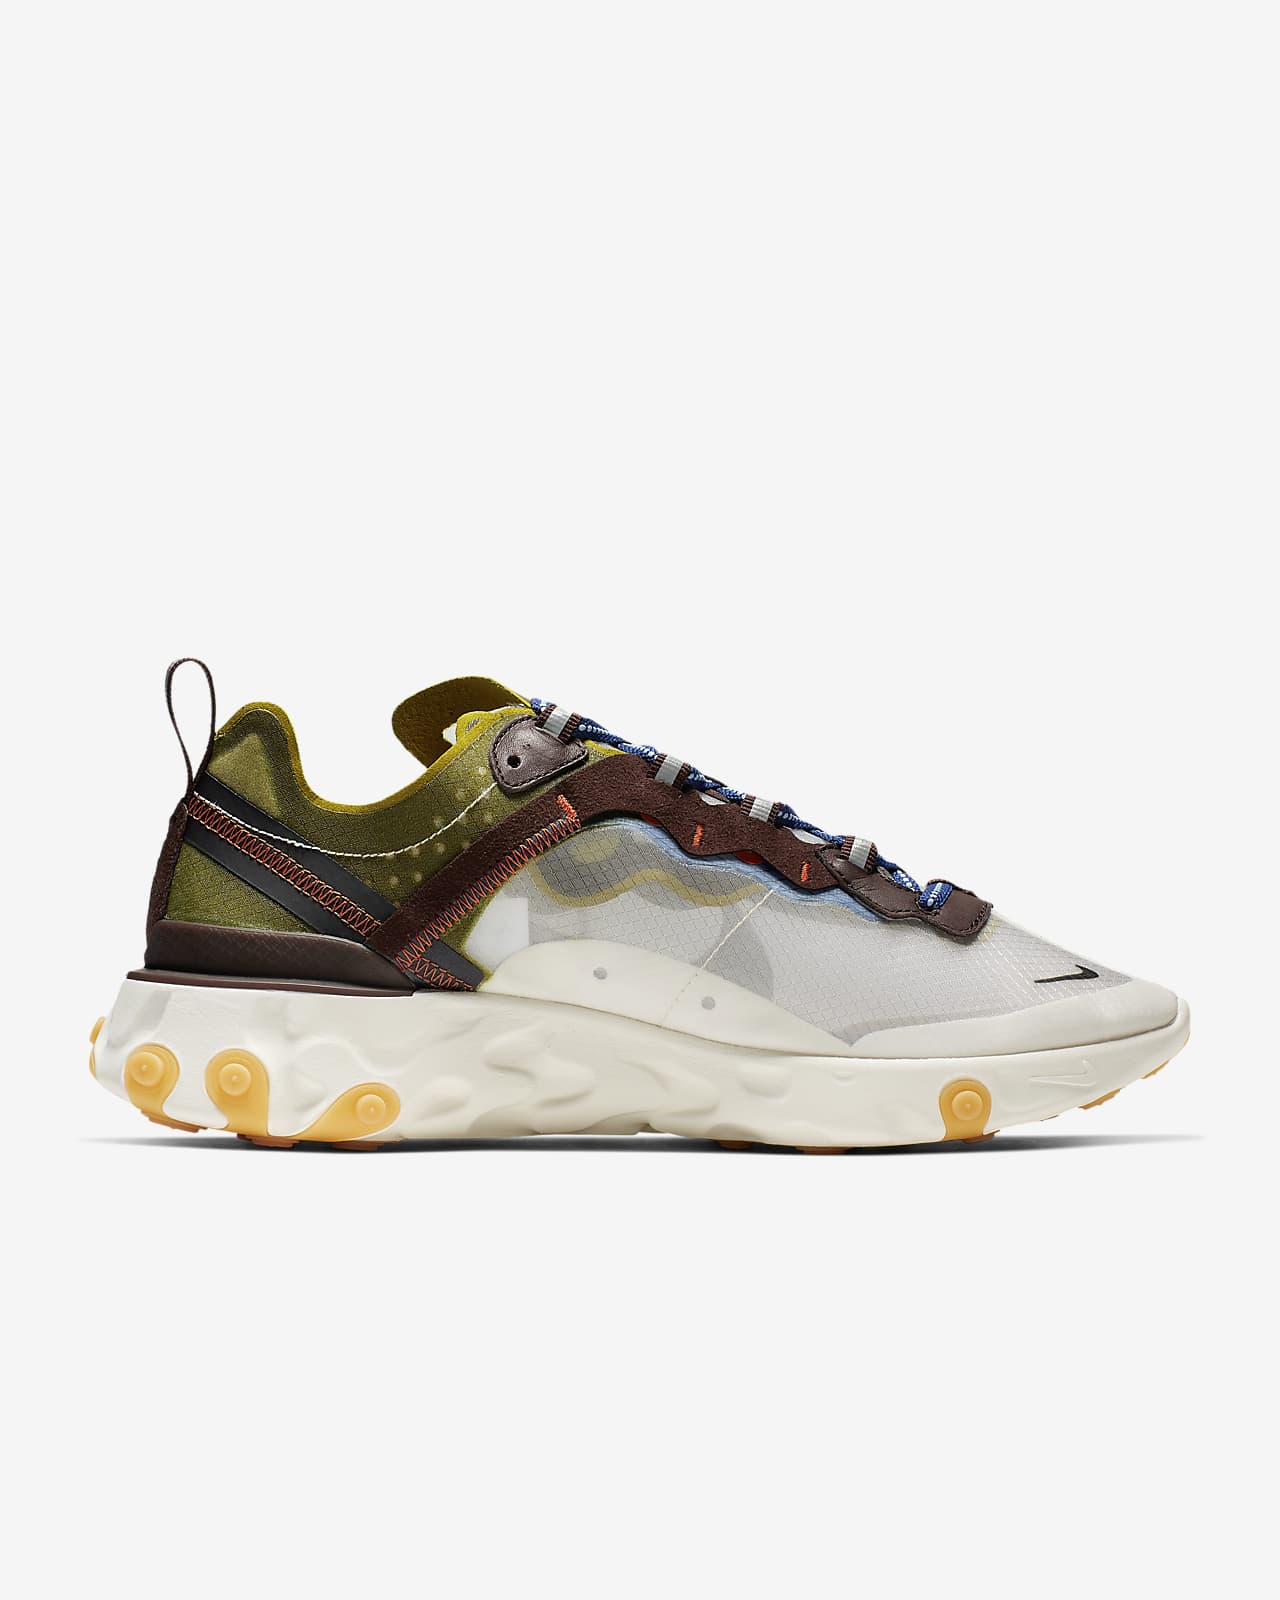 nike react element 87 price in india